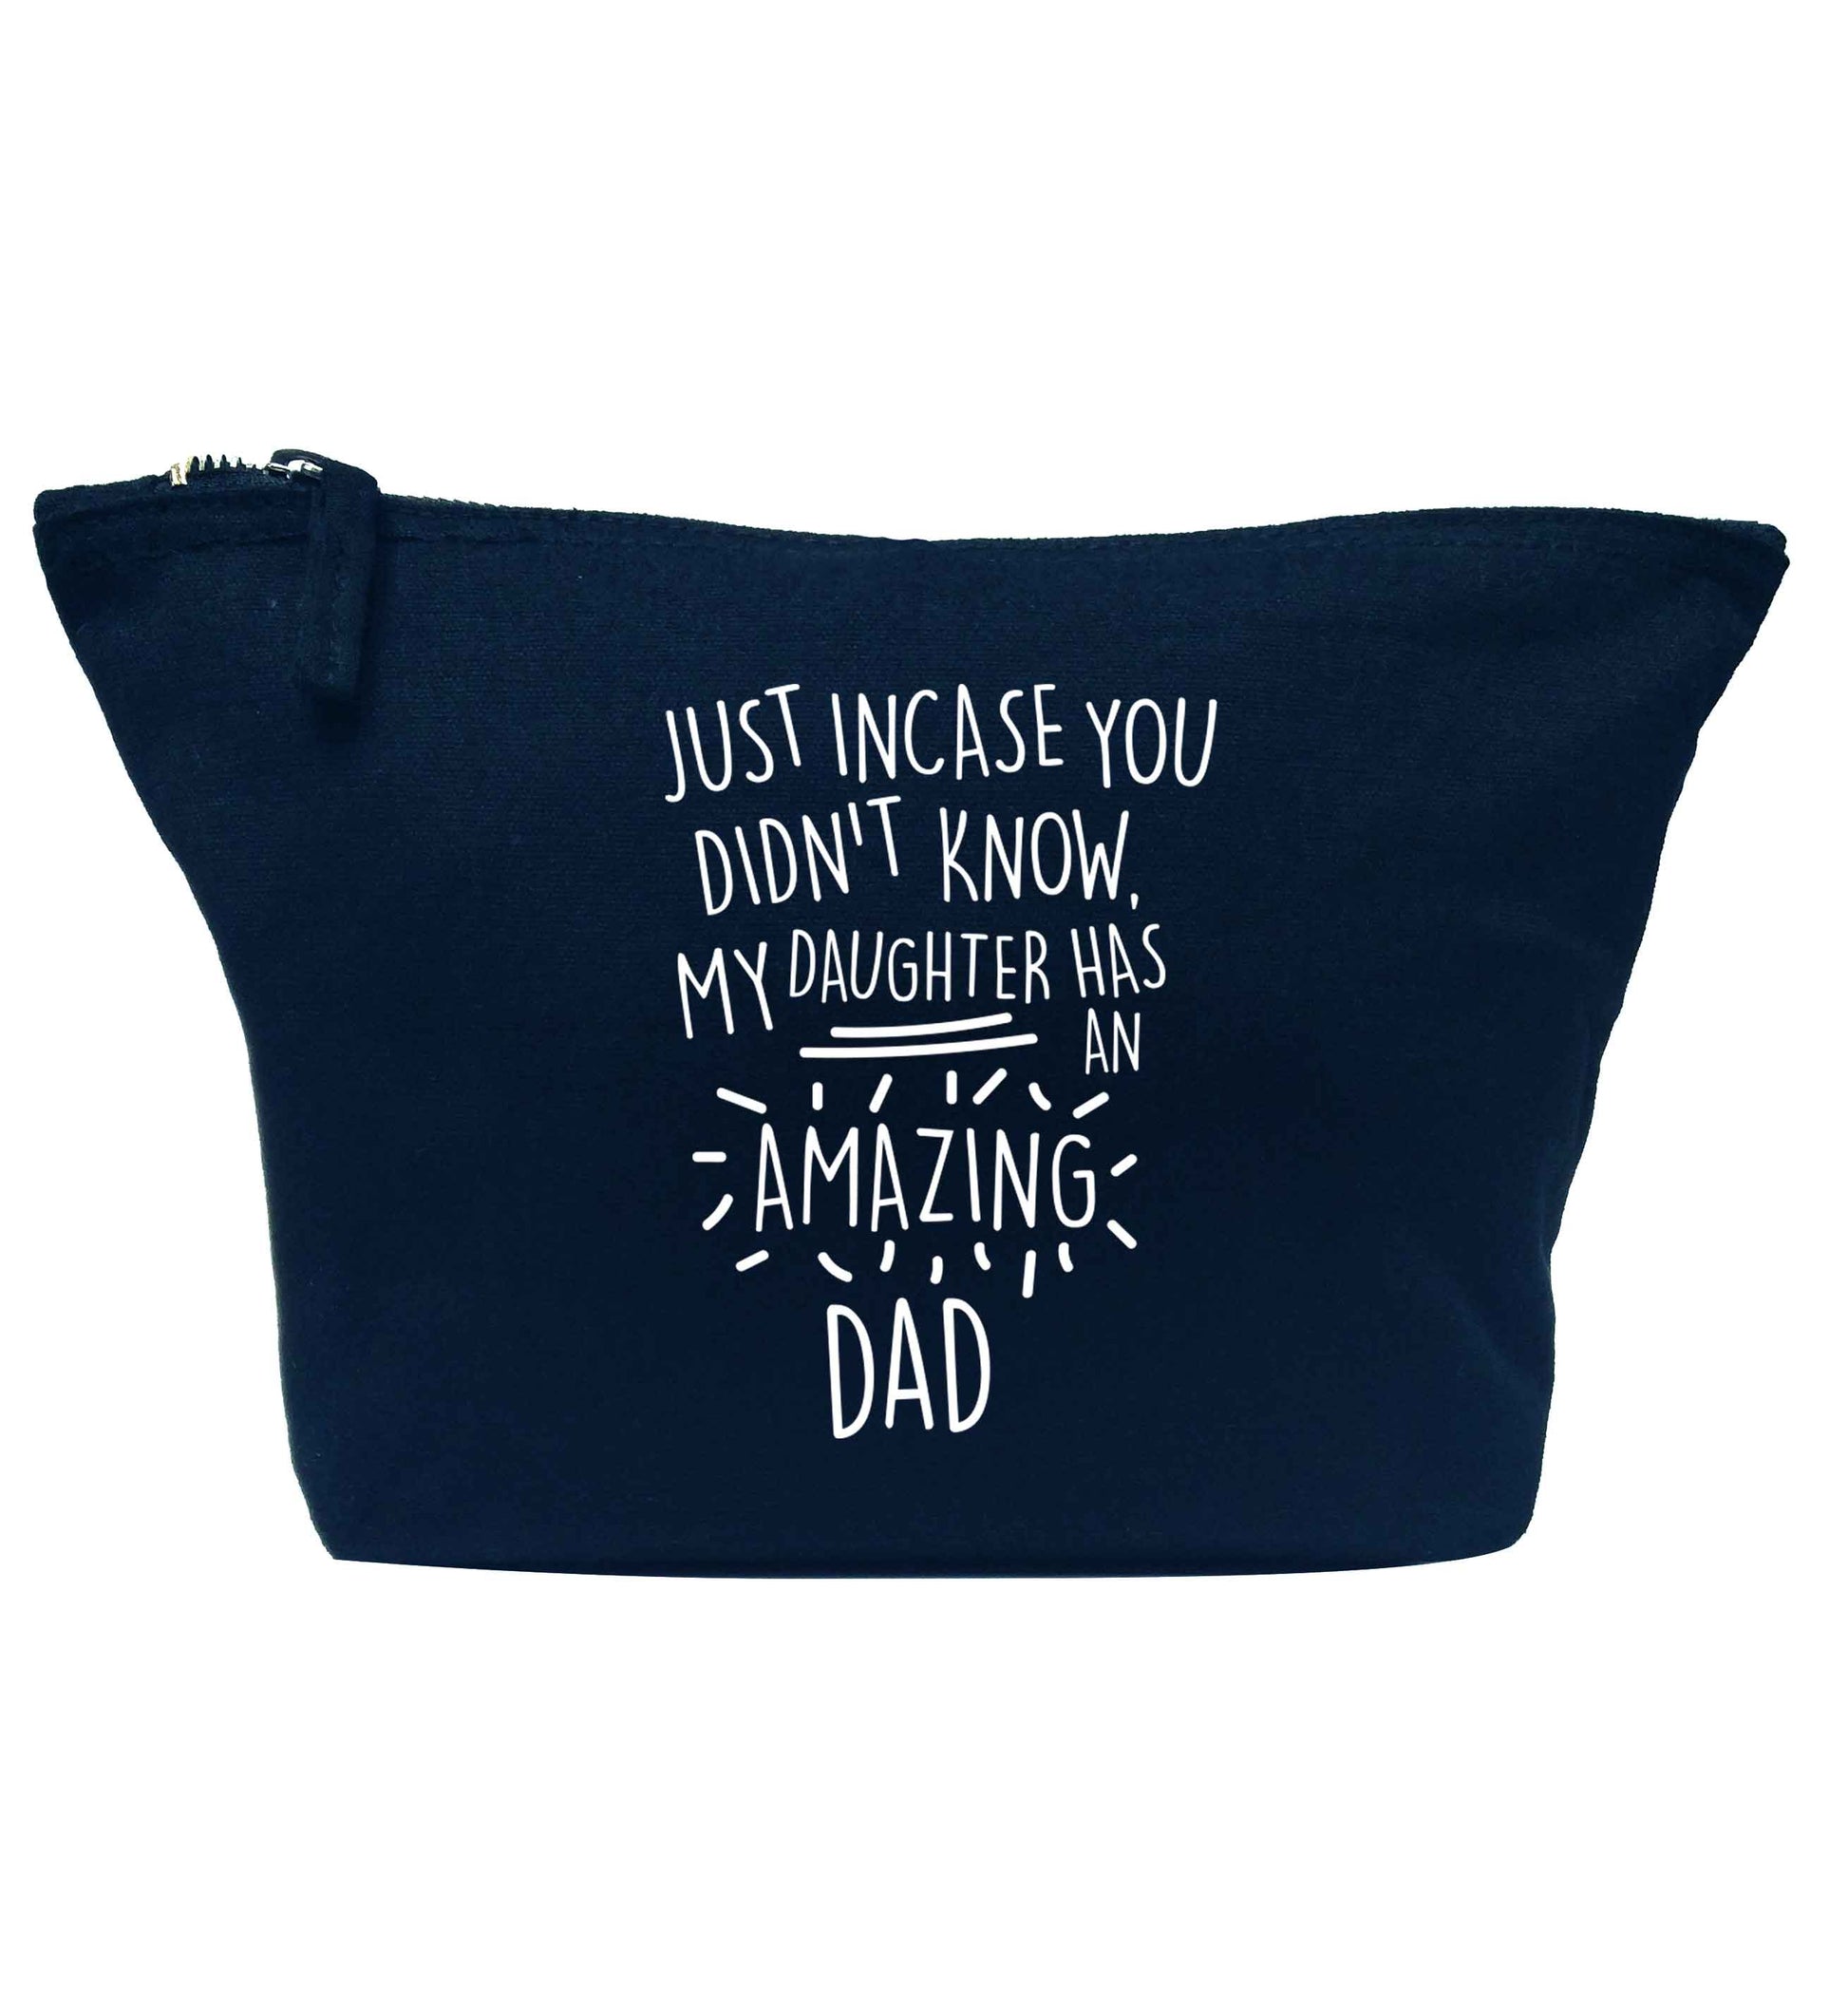 Just incase you didn't know my daughter has an amazing dad navy makeup bag